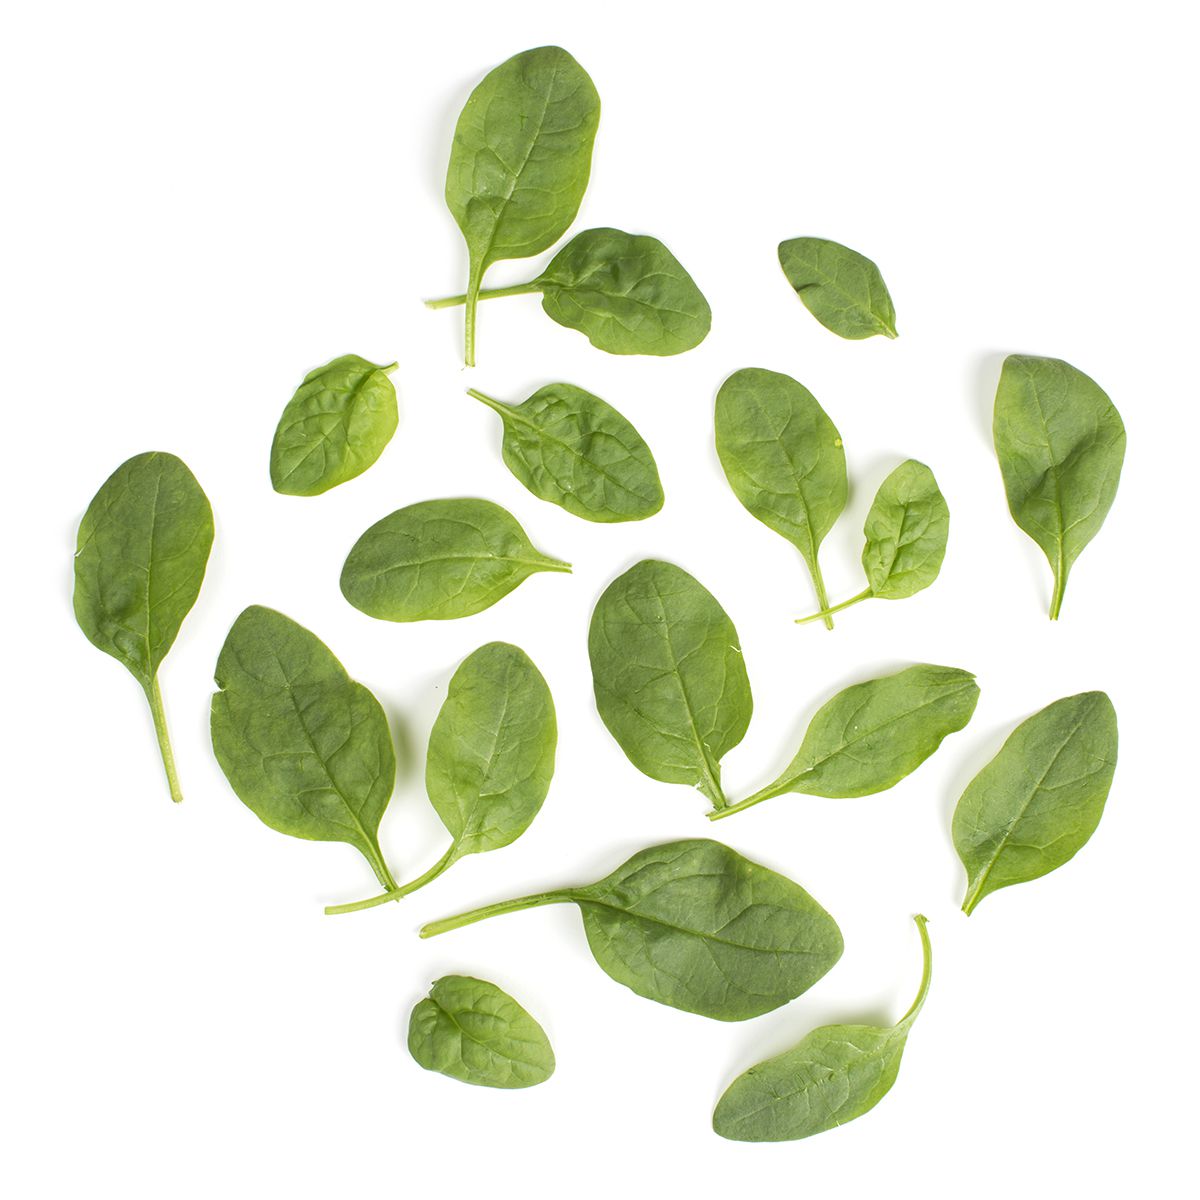 BoxNCase Triple Washed Spinach 2.5 LB